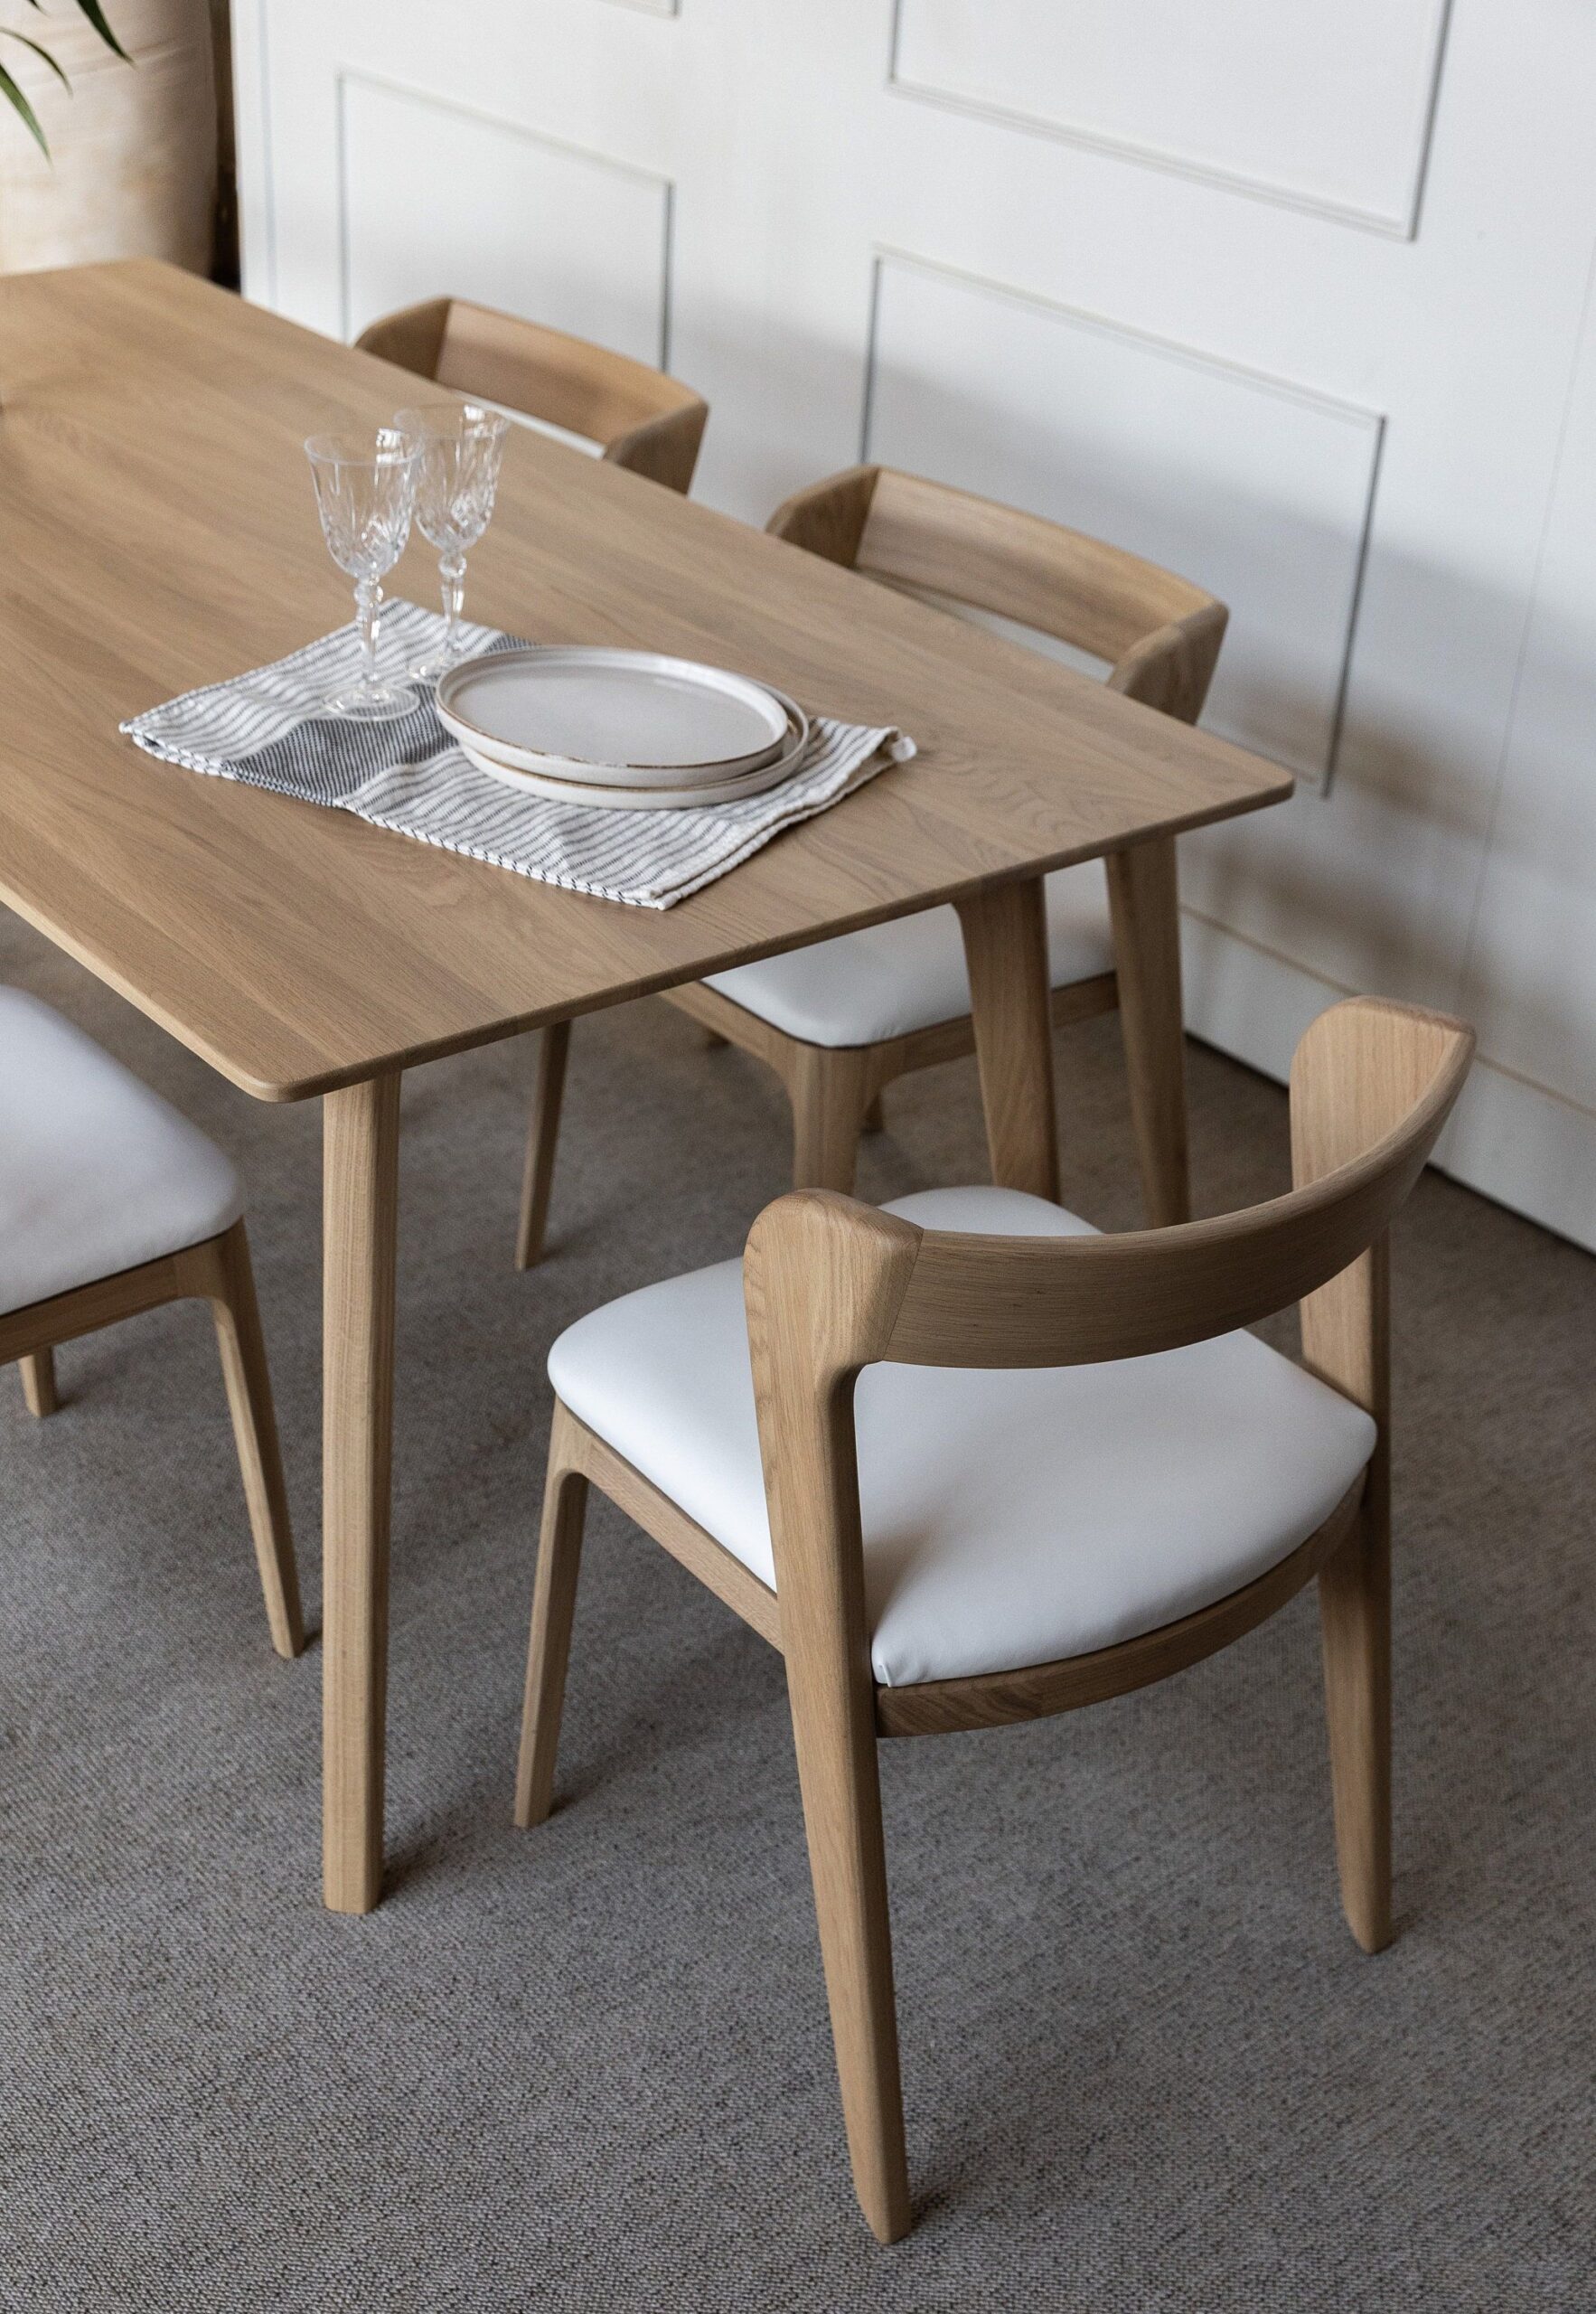 Upgrade Your Dining Space with These  Stylish Kitchen Table Sets